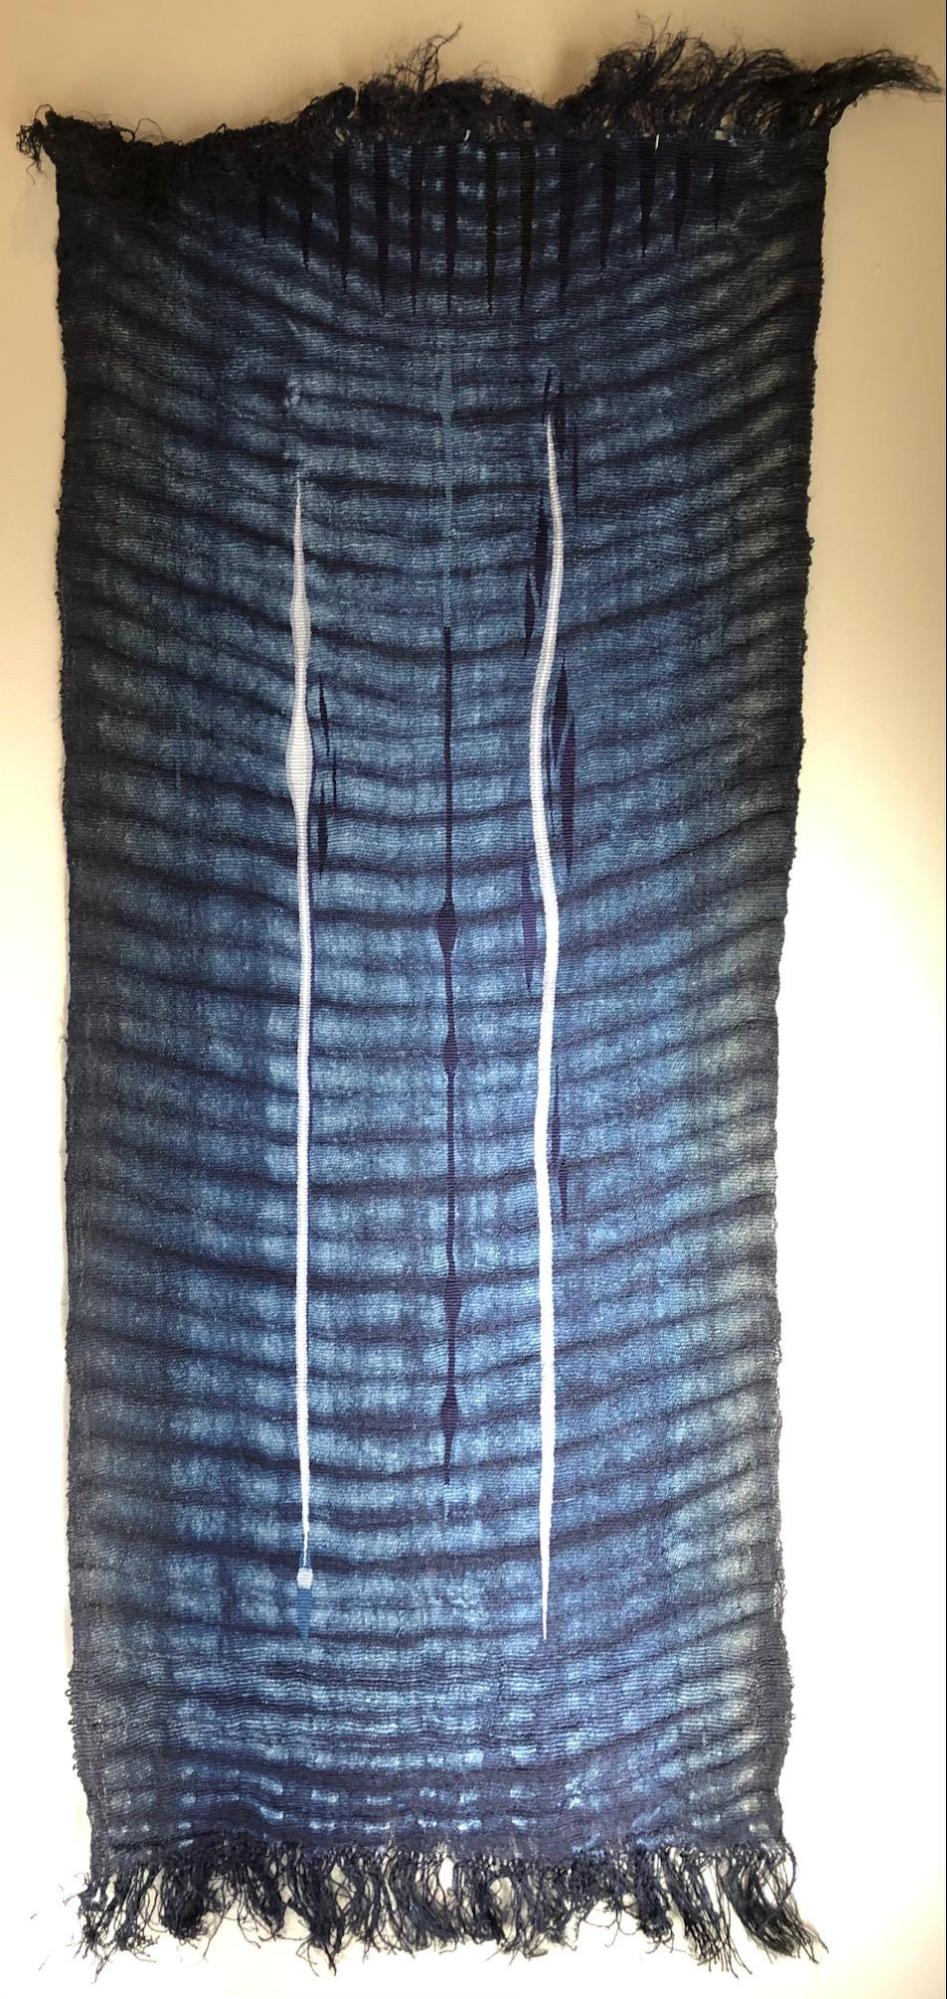 Frank Connett, Water Snake, Cotton warp weaving on agave rebozo, dyed with indigo and walnut, 67.5” x 25.5”